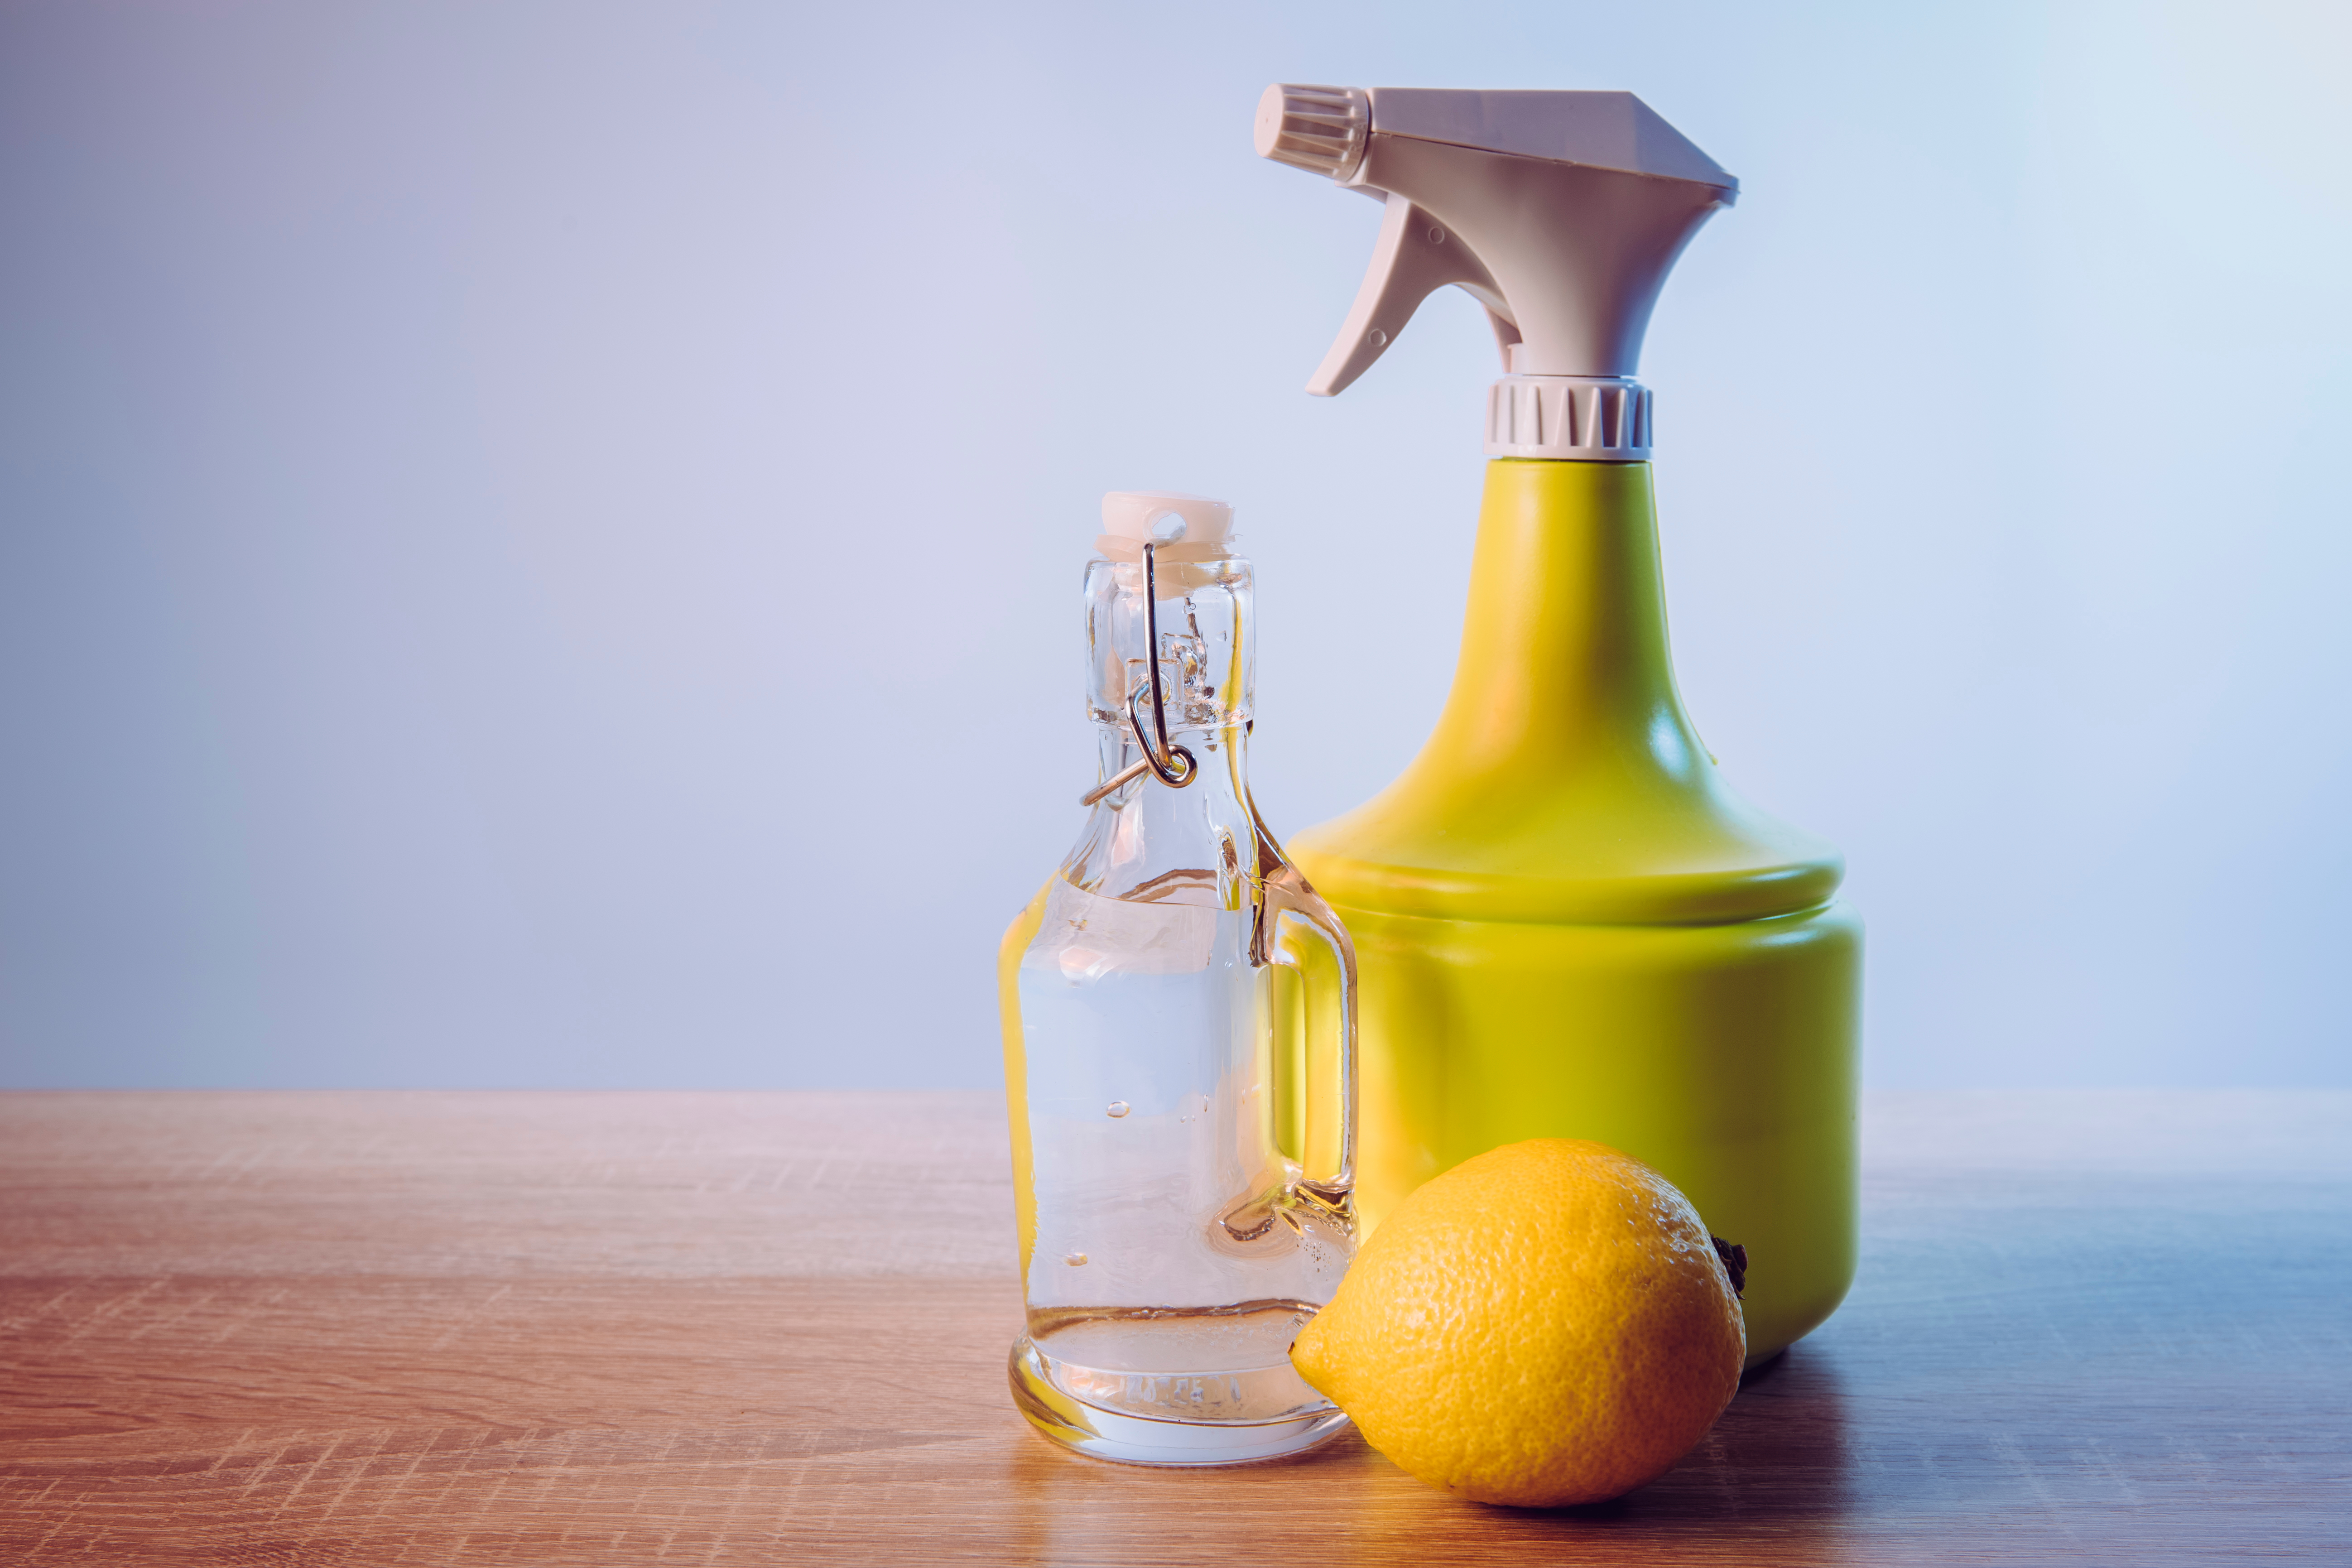 Make sure you have water or water infused with lemon ready to mix with vinegar and for rinsing. | Source: Shutterstock